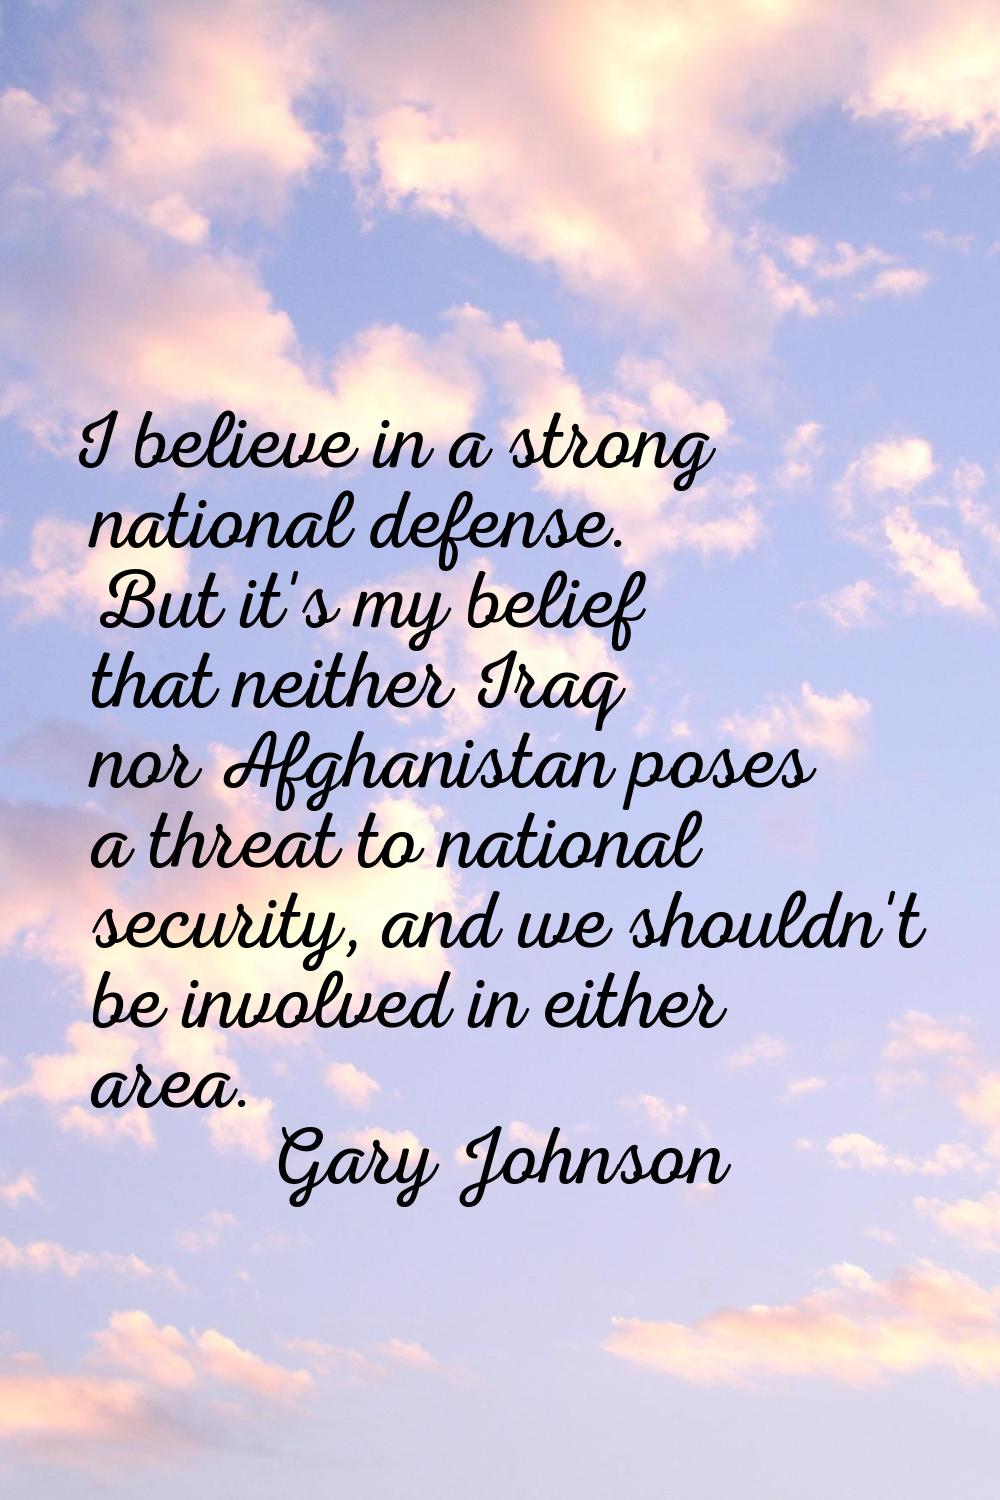 I believe in a strong national defense. But it's my belief that neither Iraq nor Afghanistan poses 